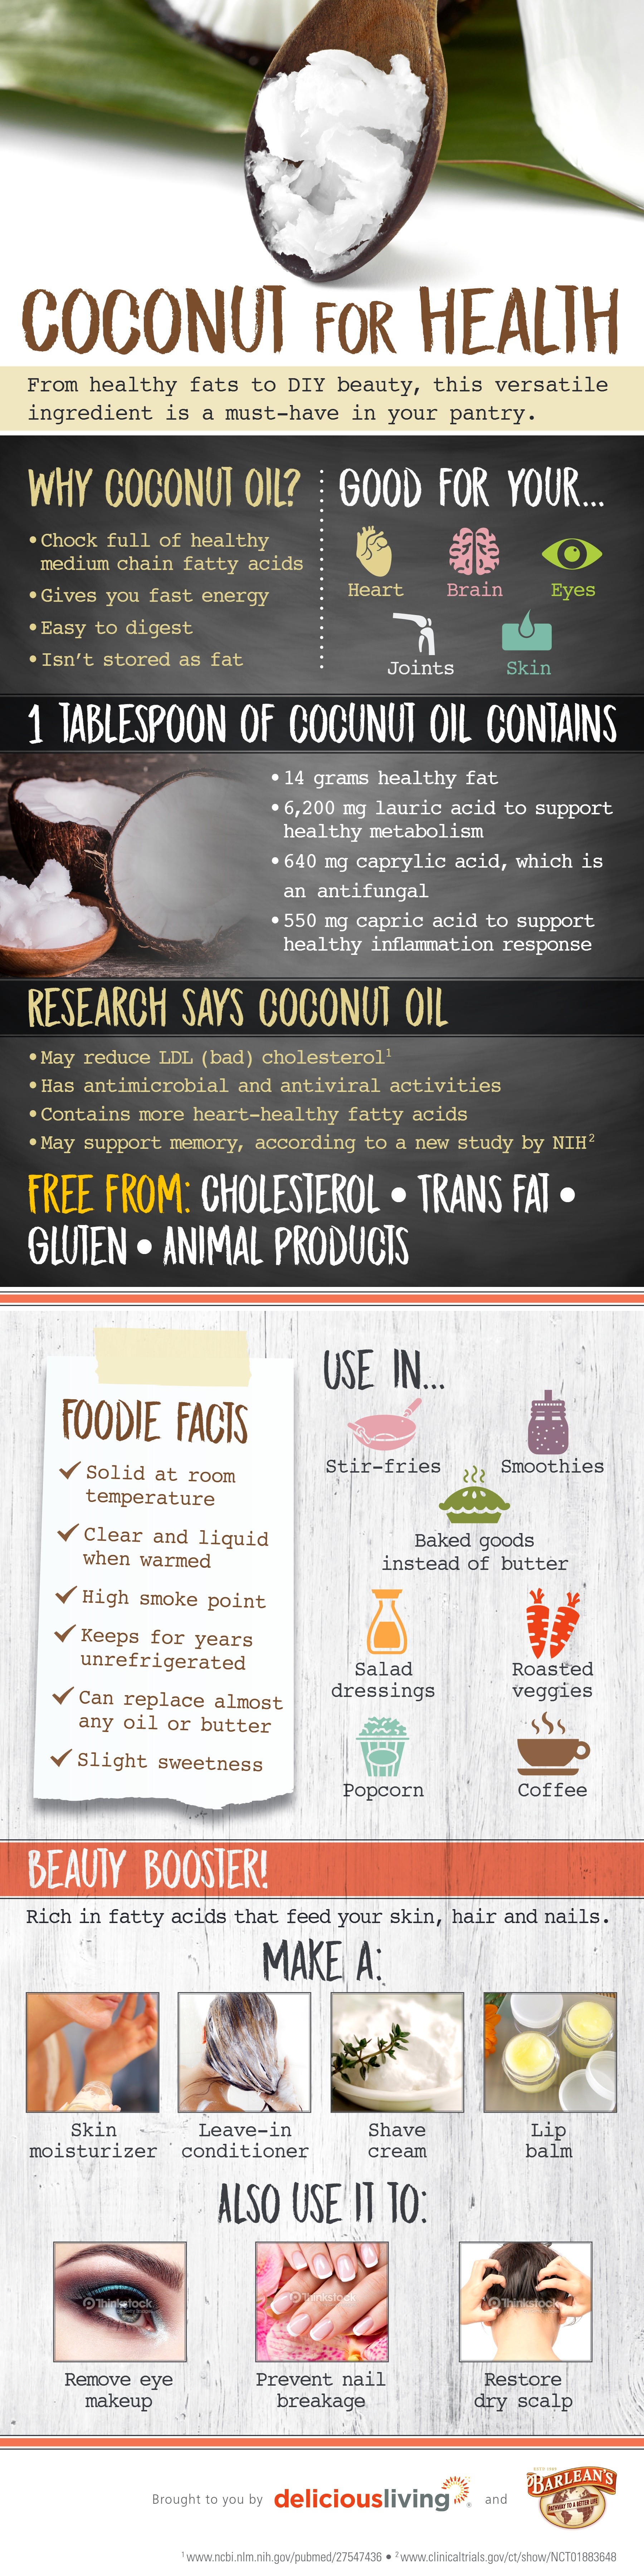 Coconut for Health Infographic